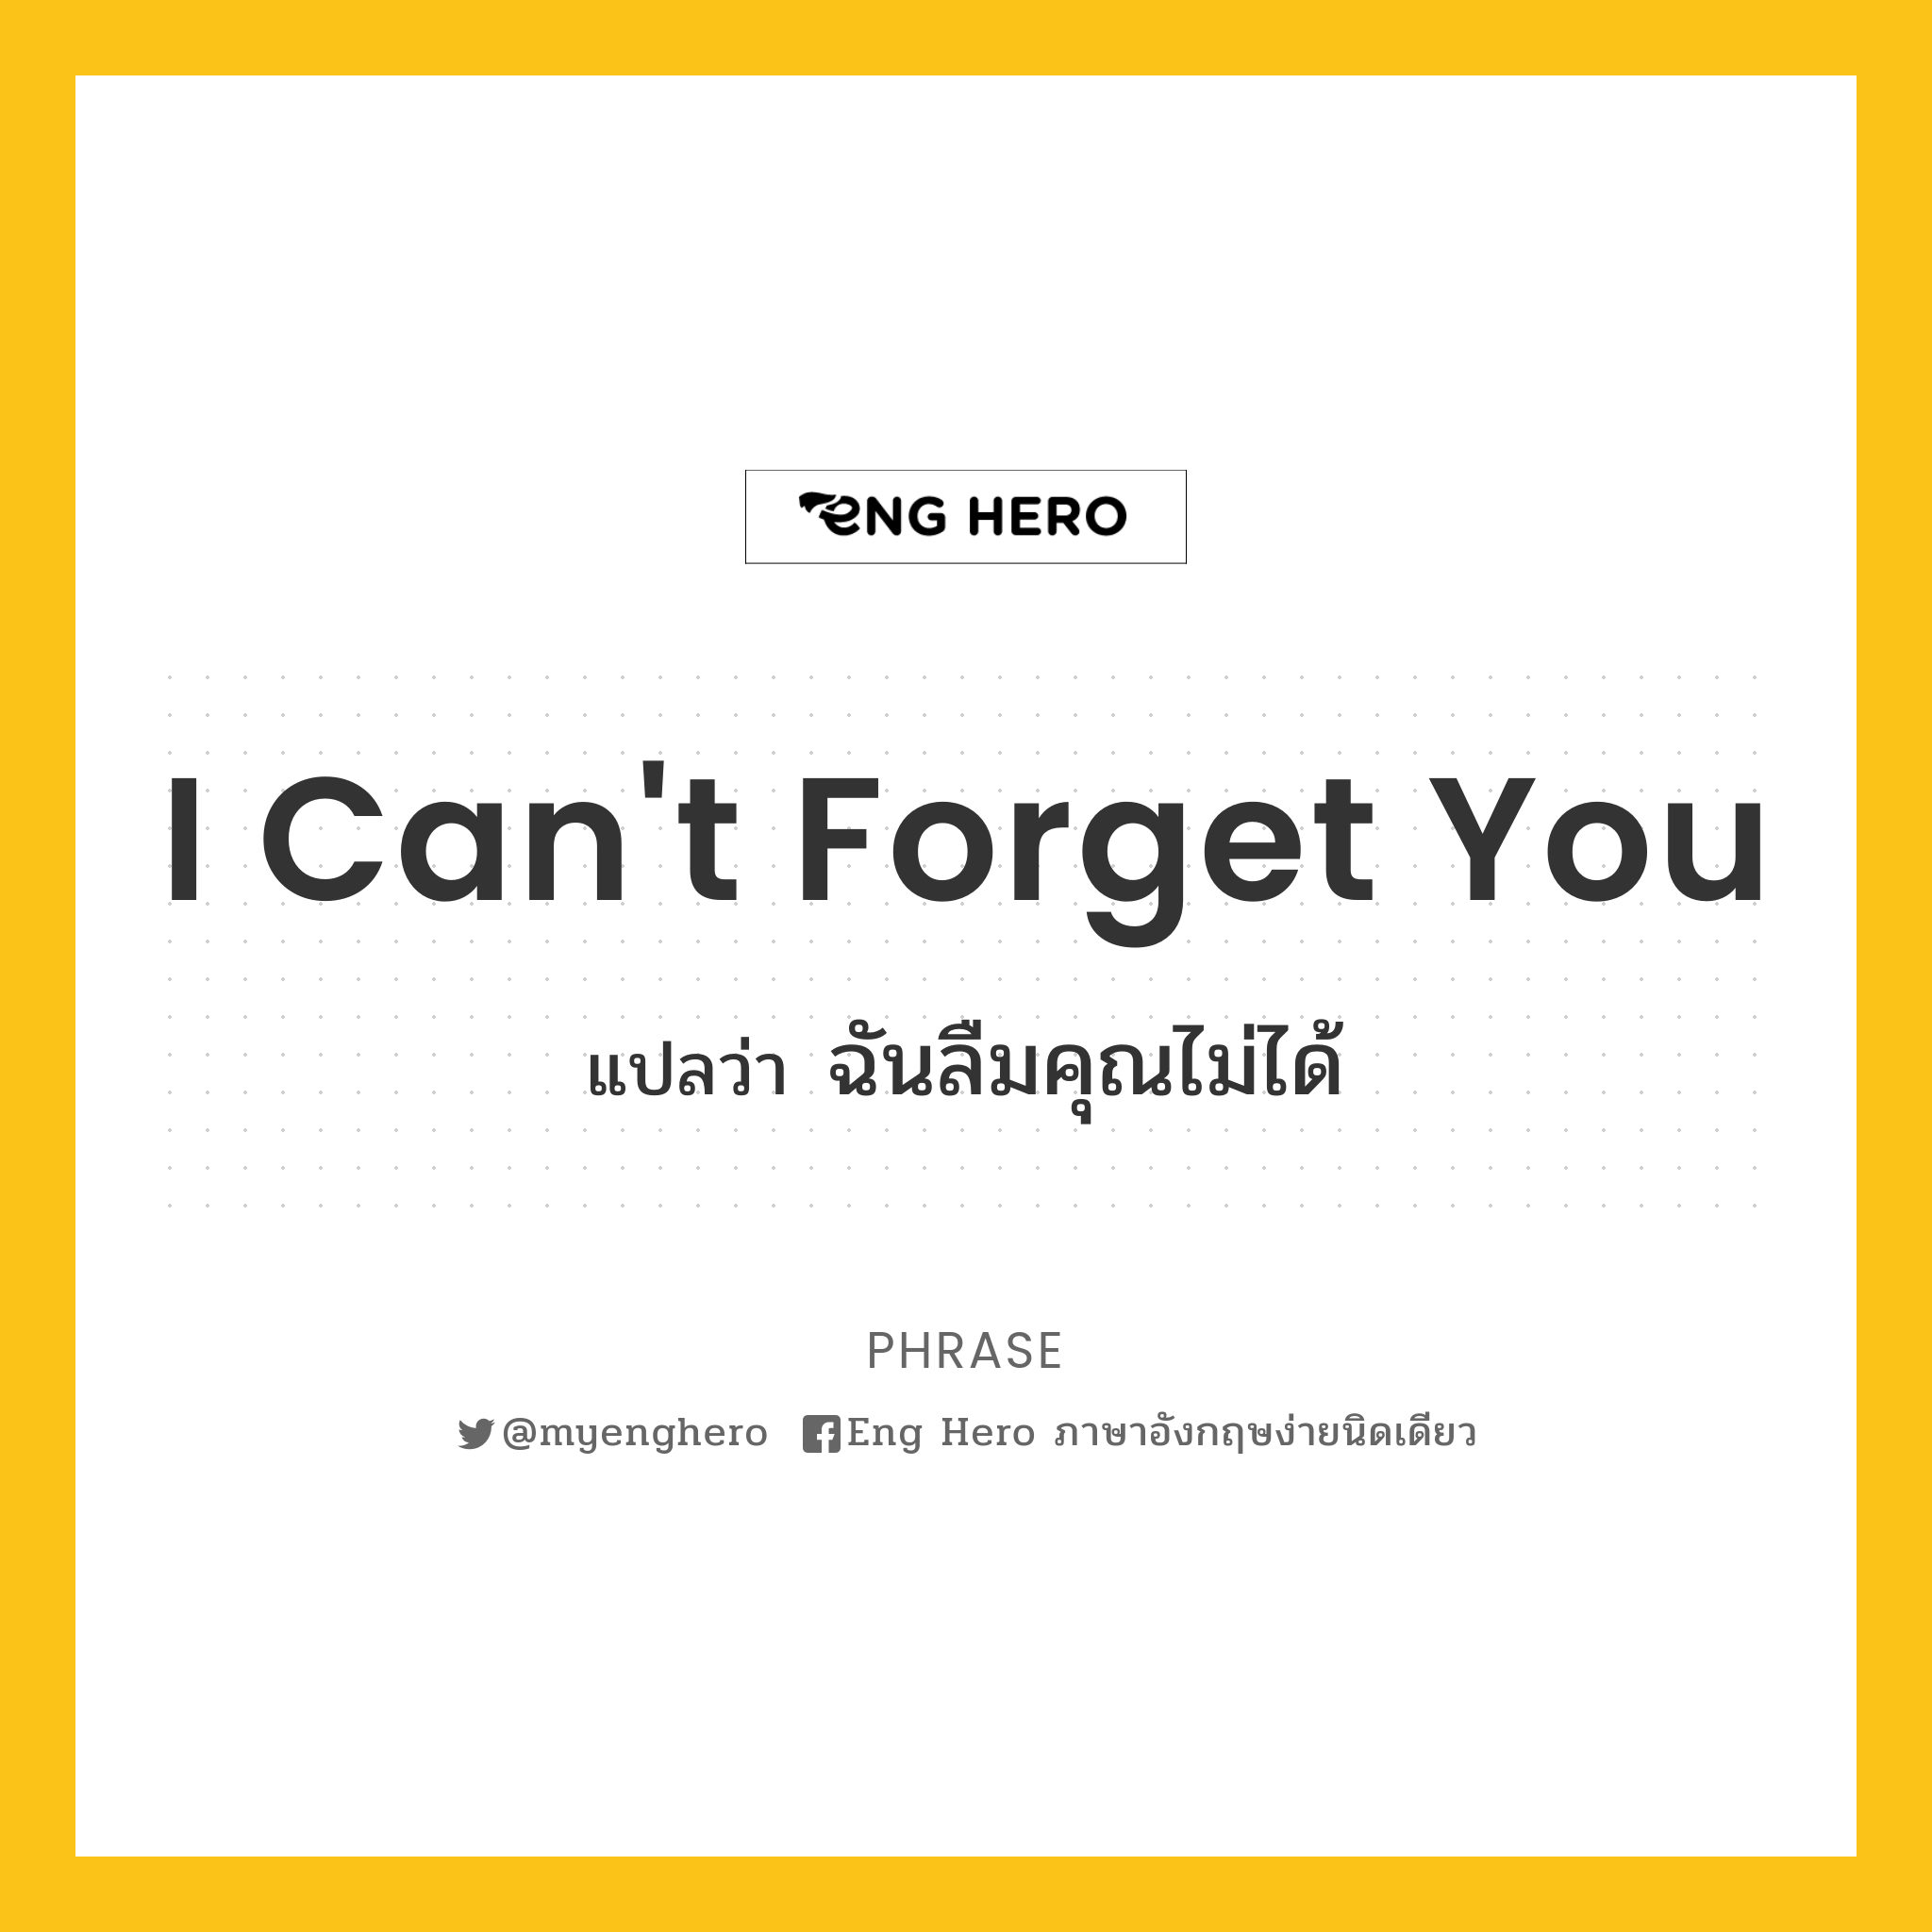 I can't forget you